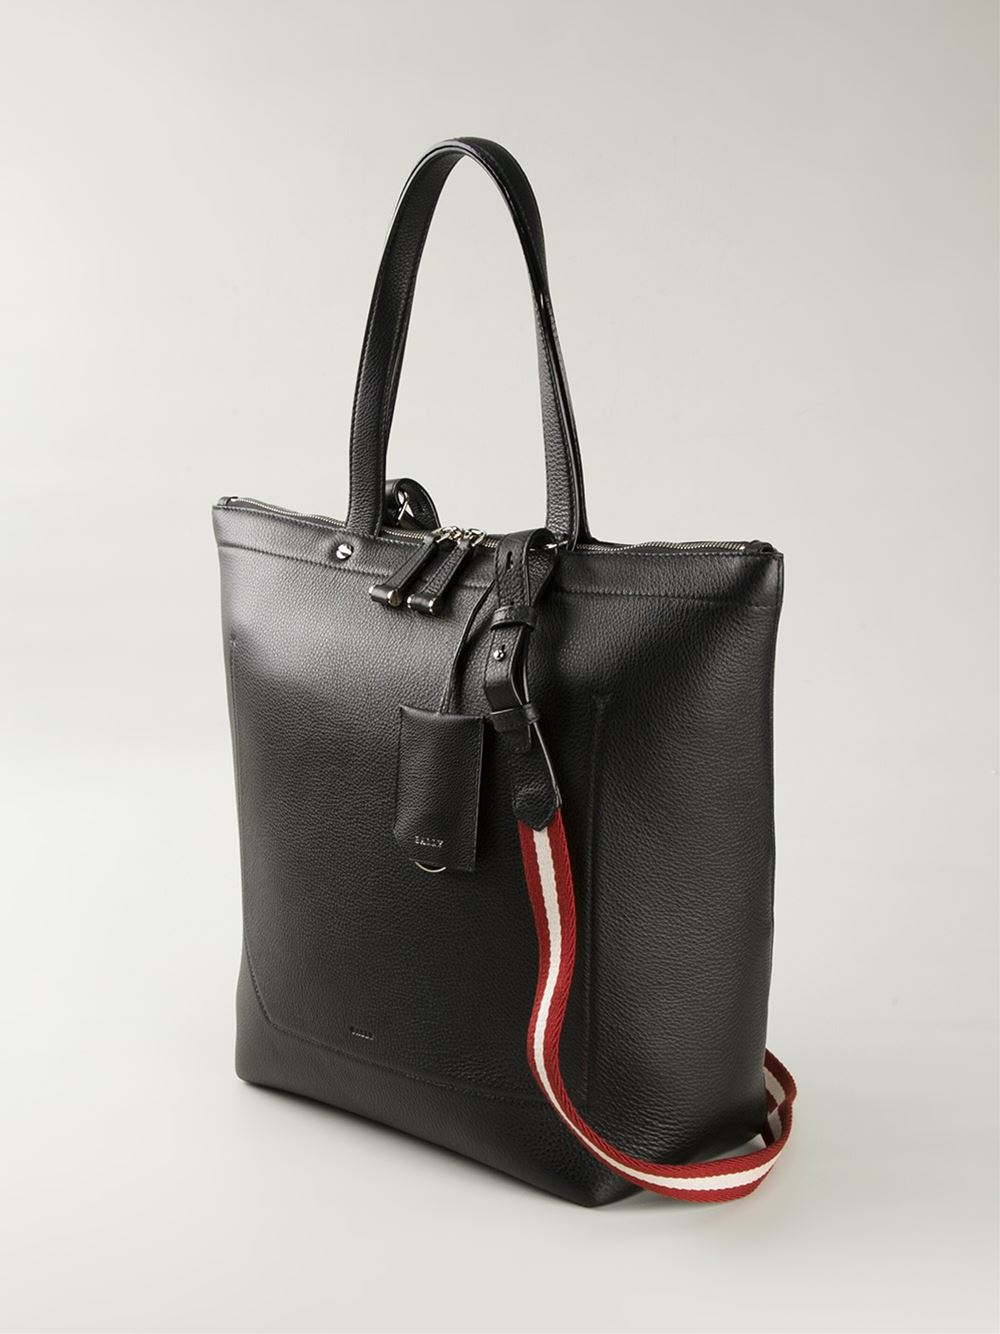 Bally 'Ssime' Tote in Black - Lyst